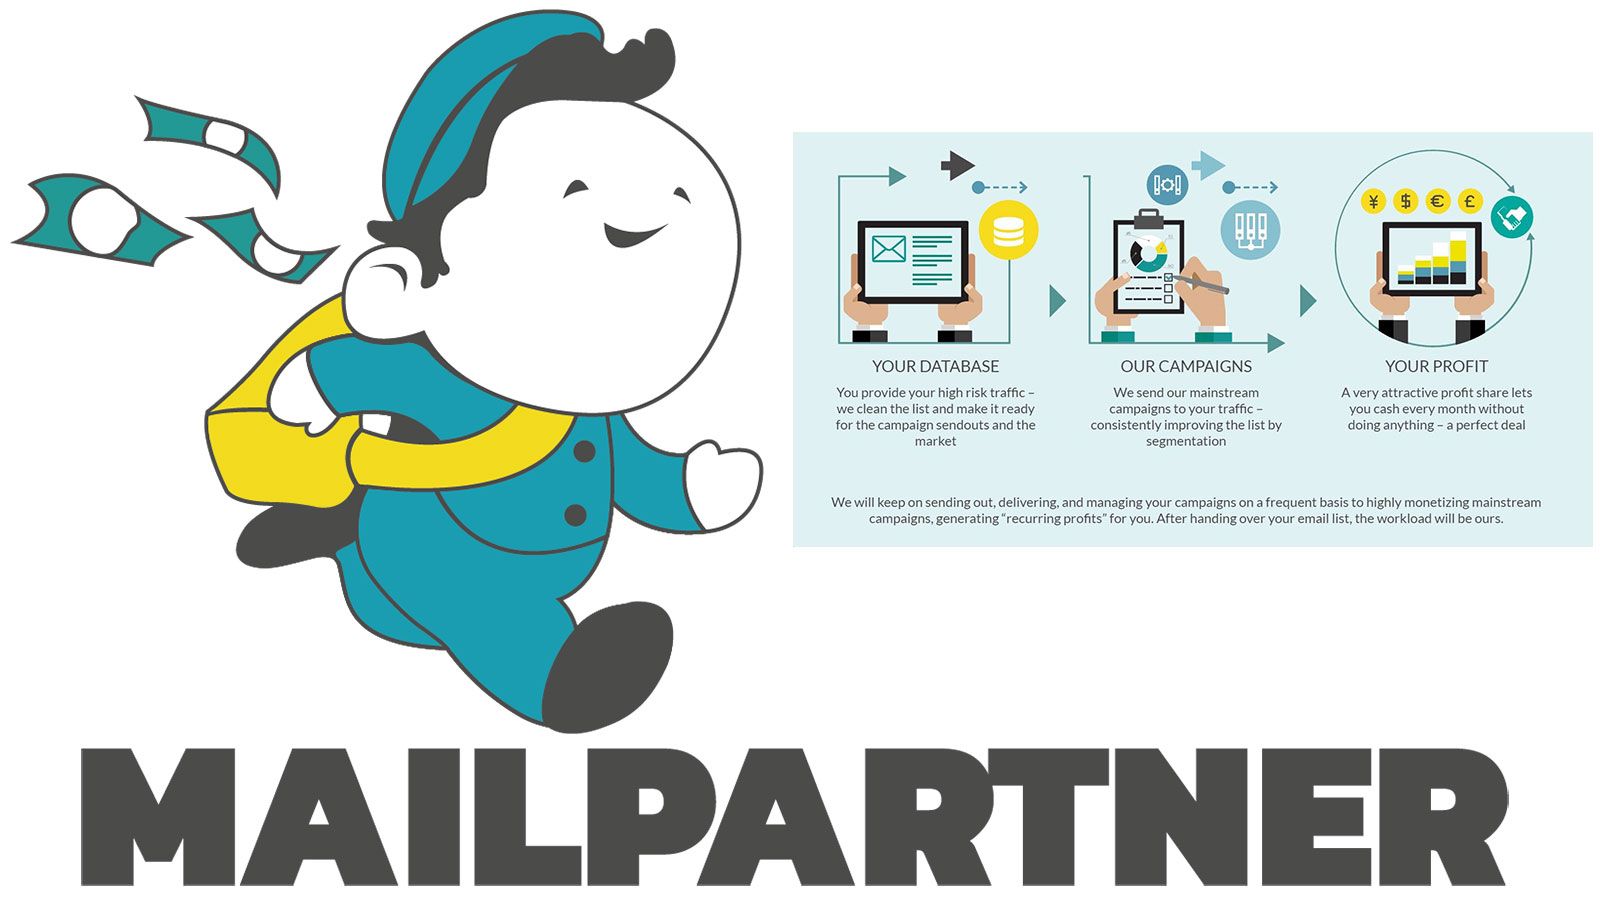 MailPartner Converts High Risk Emails With Top Monetizing Mainstream Offers